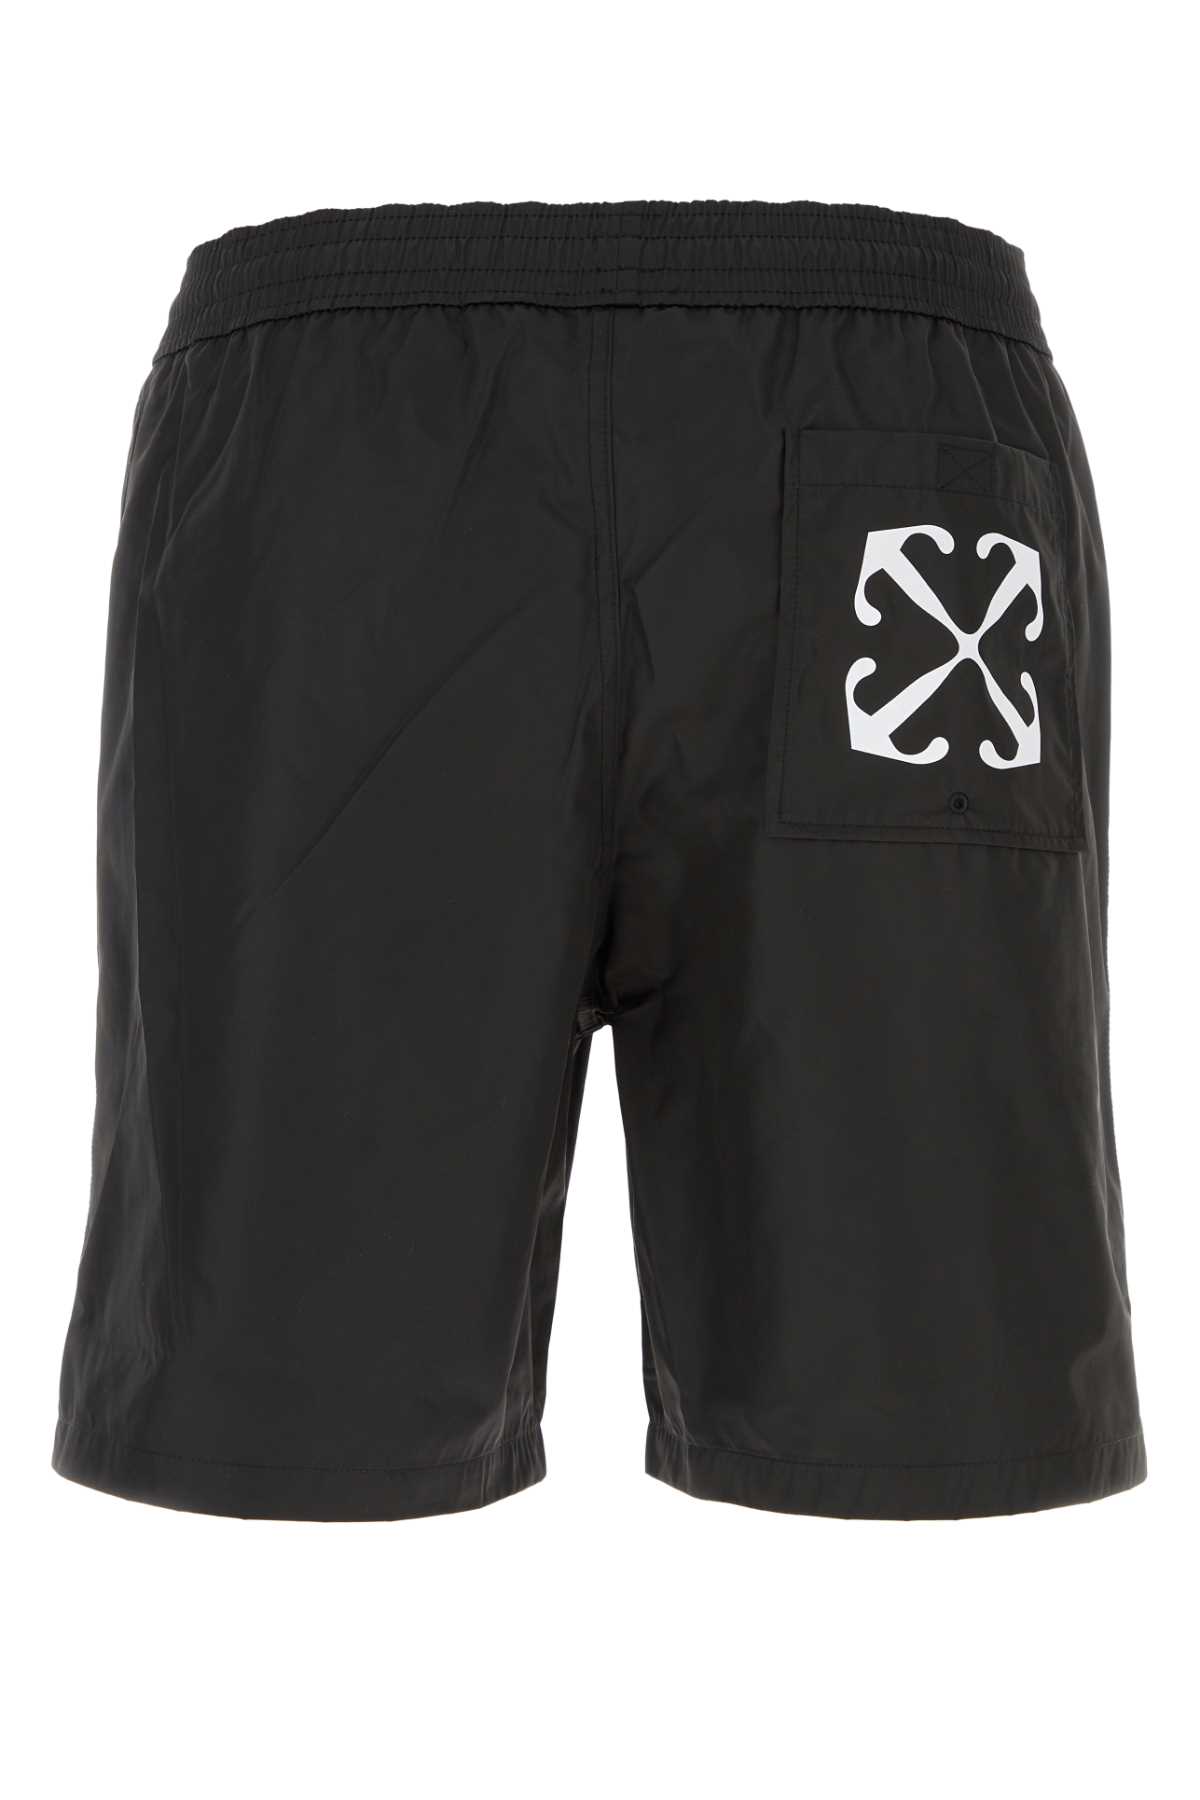 OFF-WHITE BLACK POLYESTER SWIMMING SHORTS